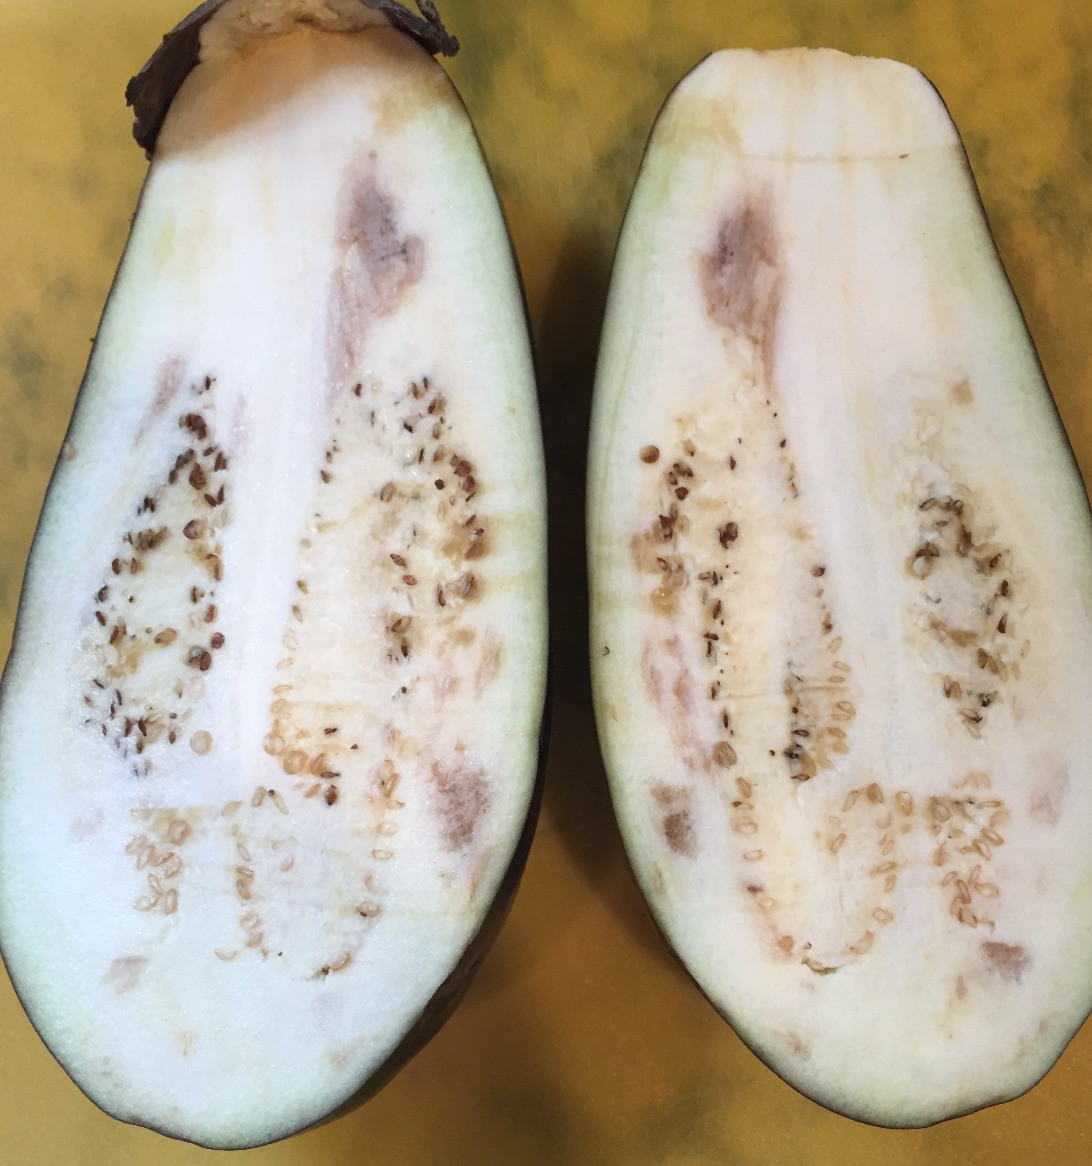 Eggplant Brown Inside Awesome Brownish areas Inside This Eggplant Look Shady but they